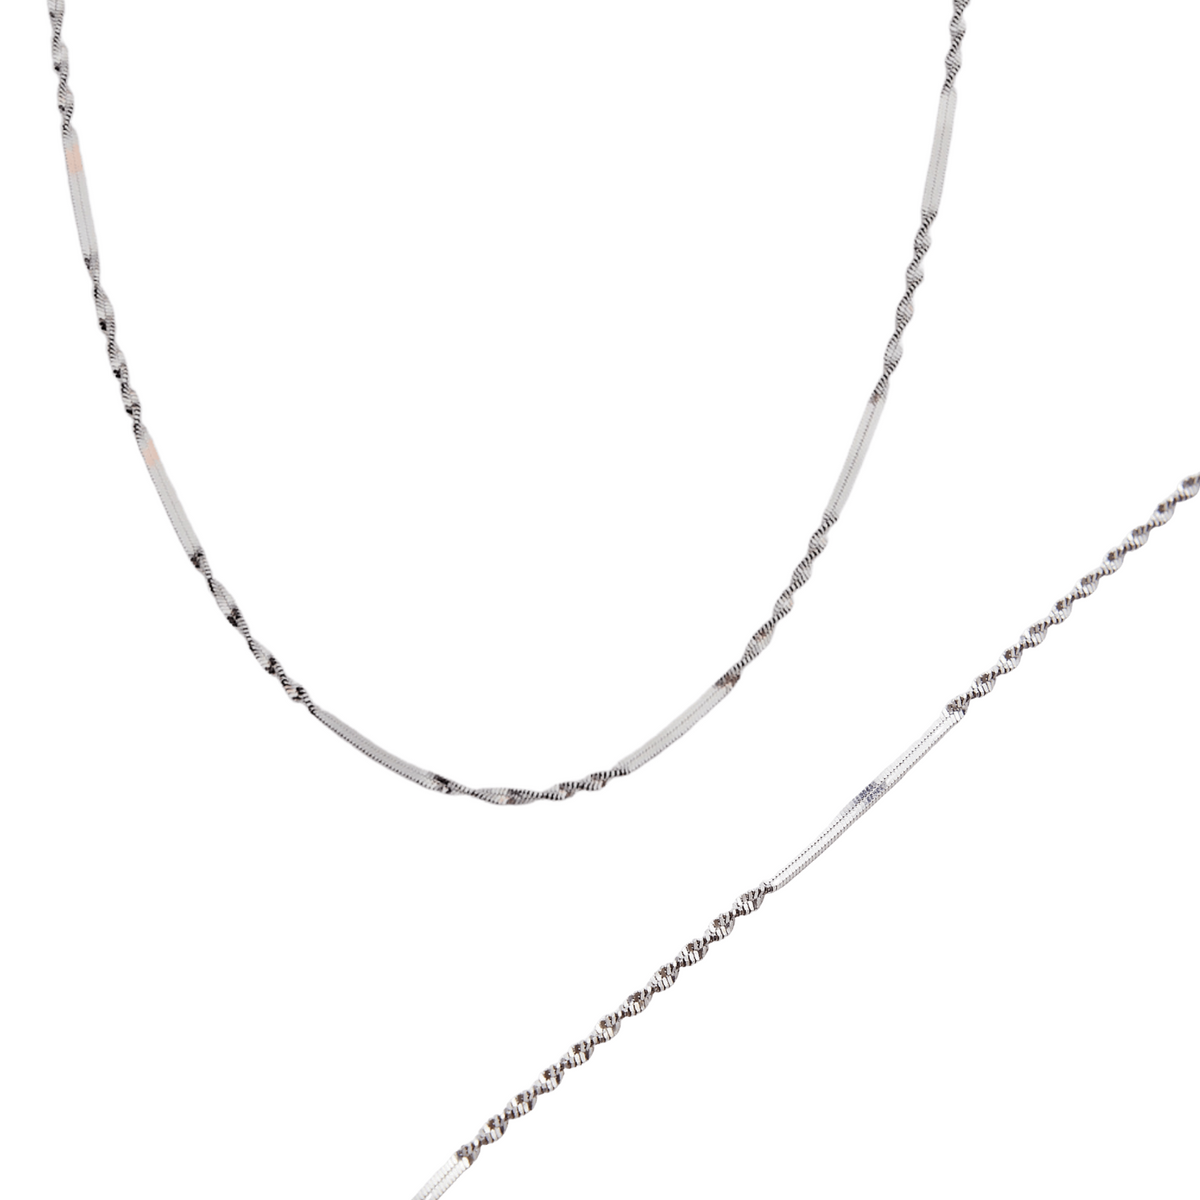 Half Twisted Sterling Silver Chain Necklace Bracelet Set Semi Singapore Chain